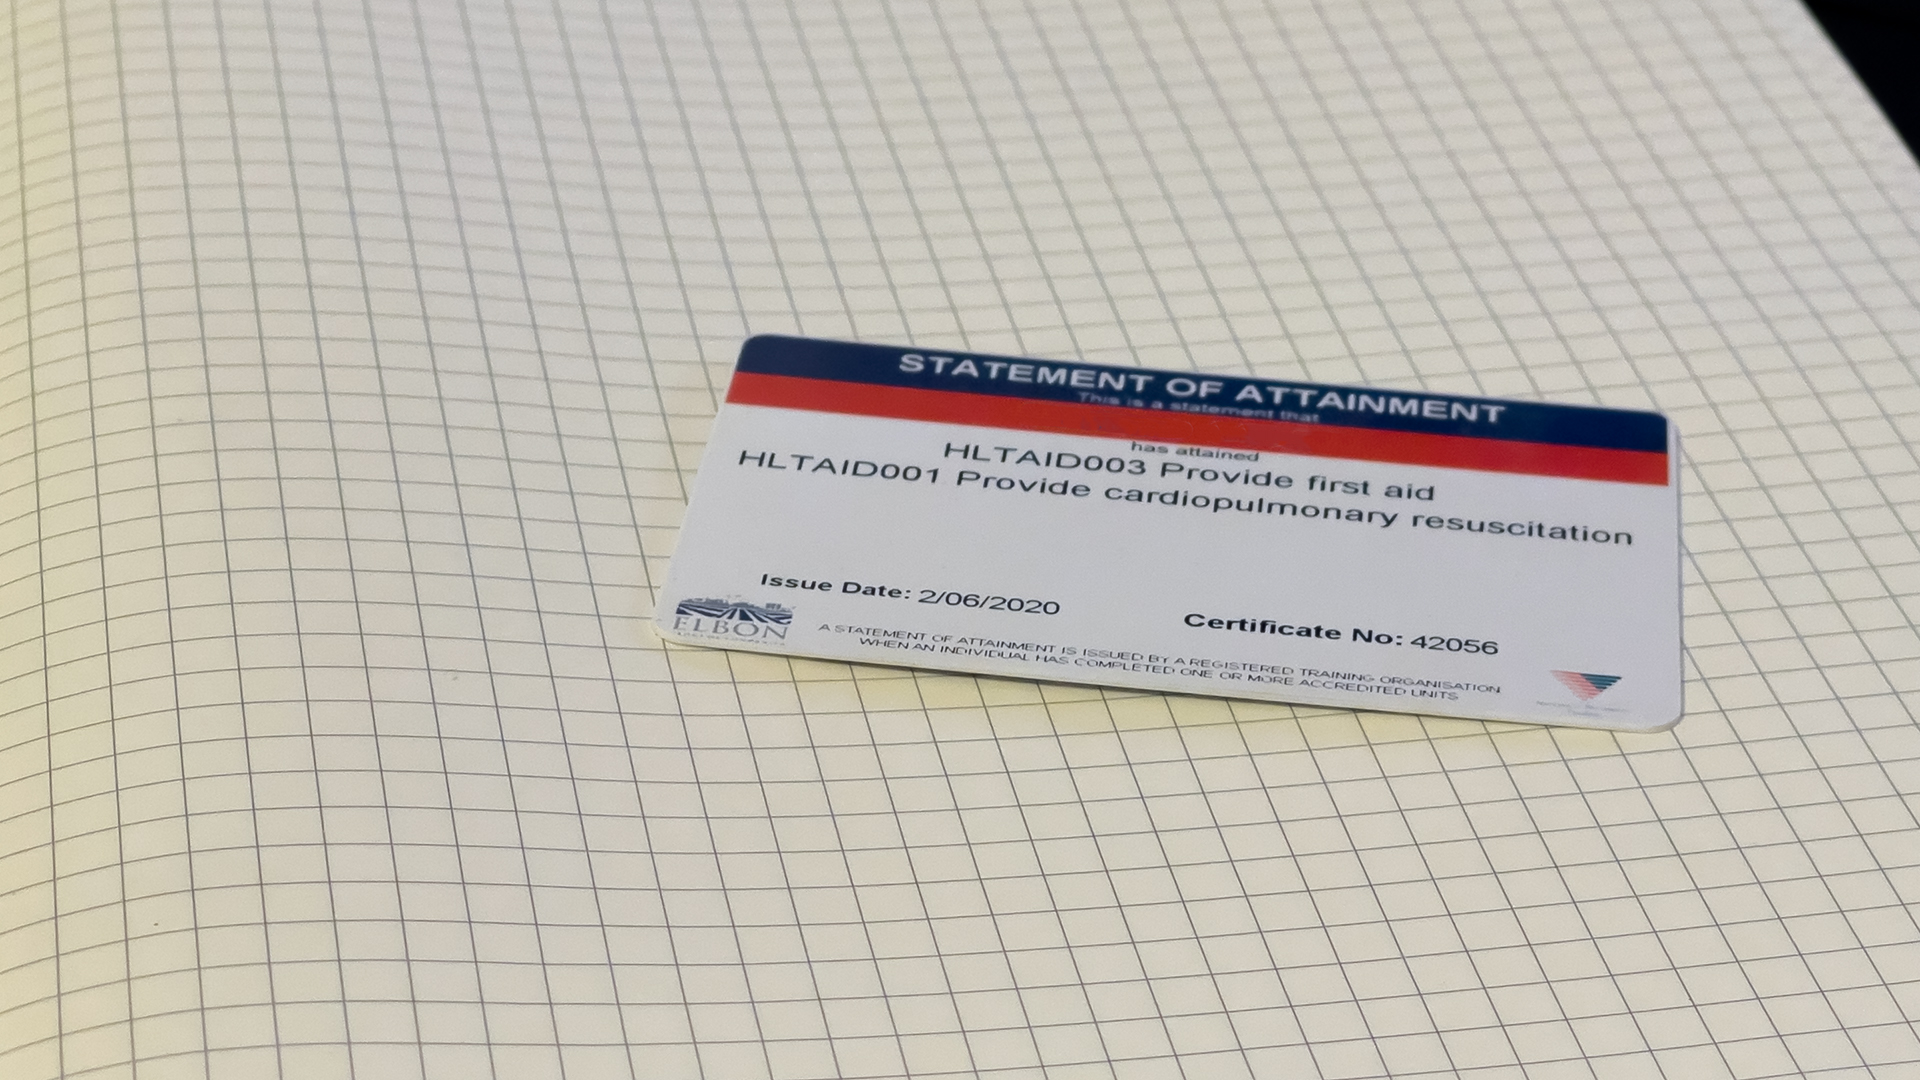 Statement of attainment card. Date issued is two years ago.